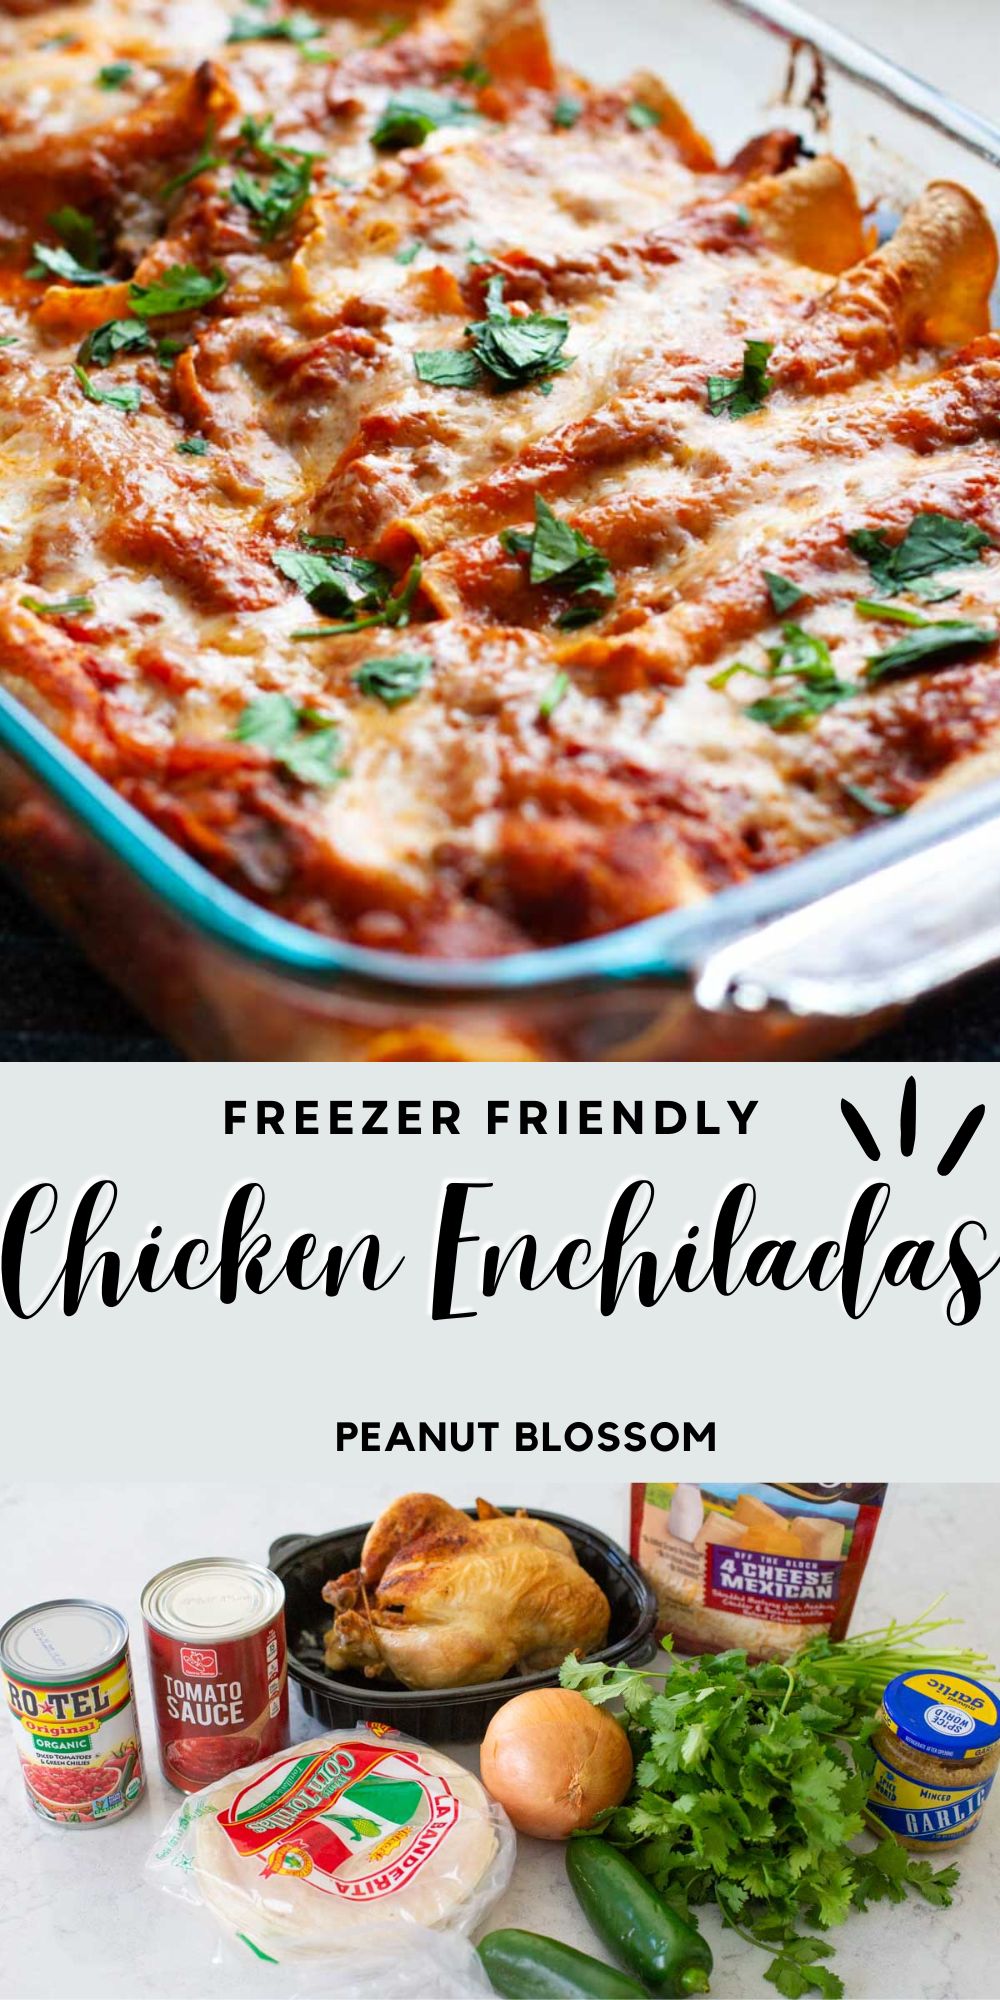 The photo collage shows the pan of baked chicken enchiladas on top next to a photo of the ingredients to make it on the kitchen counter.